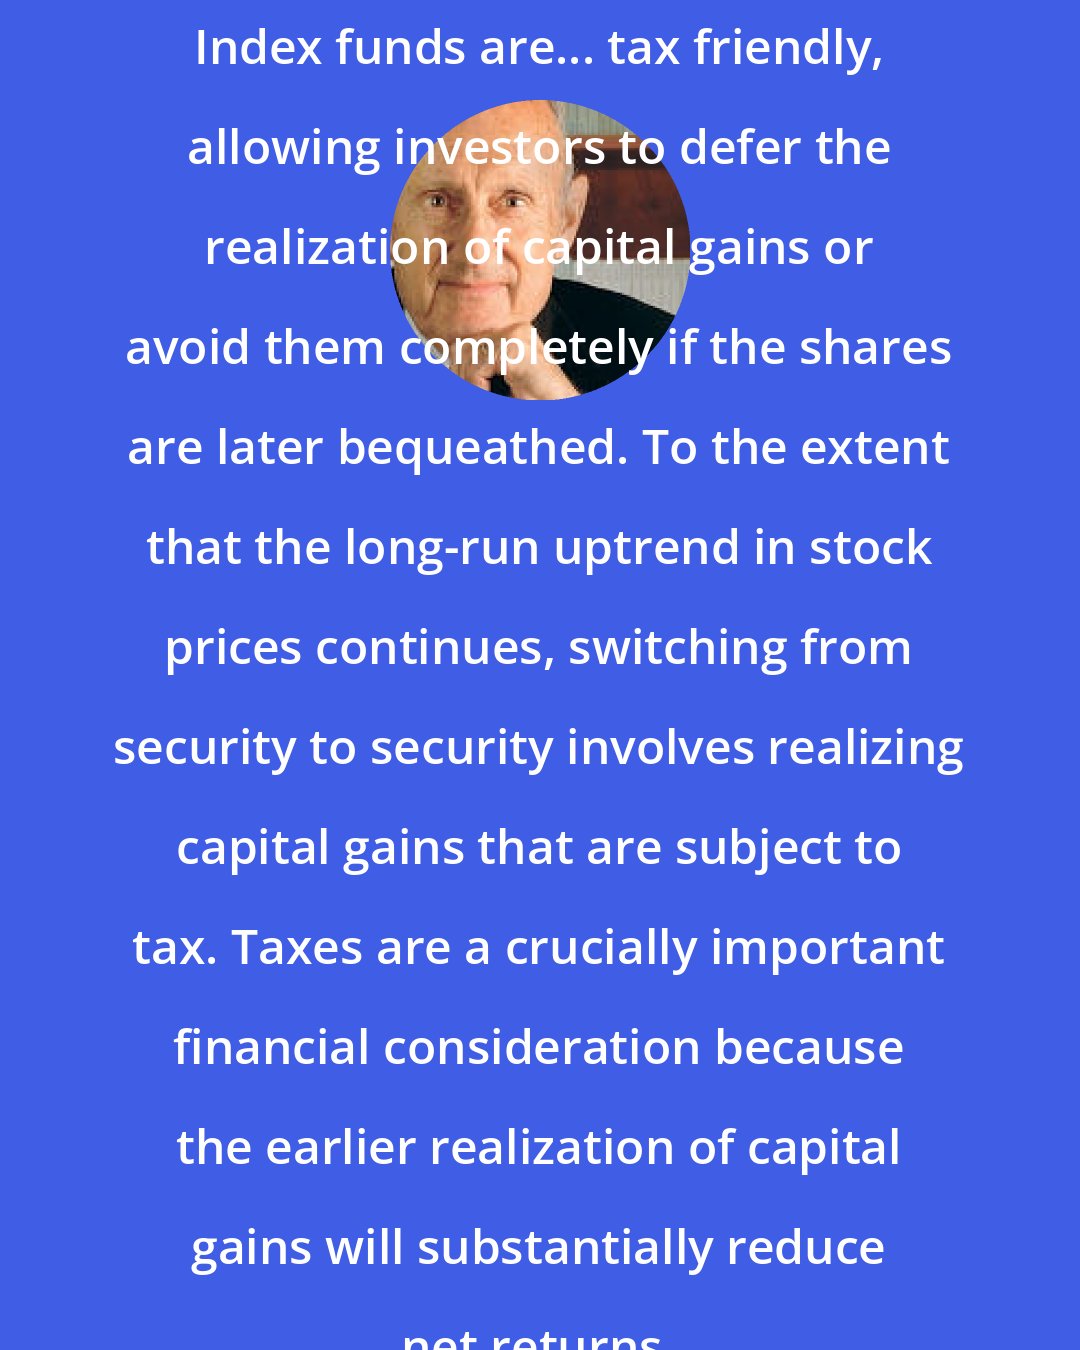 Burton Malkiel: Index funds are... tax friendly, allowing investors to defer the realization of capital gains or avoid them completely if the shares are later bequeathed. To the extent that the long-run uptrend in stock prices continues, switching from security to security involves realizing capital gains that are subject to tax. Taxes are a crucially important financial consideration because the earlier realization of capital gains will substantially reduce net returns.